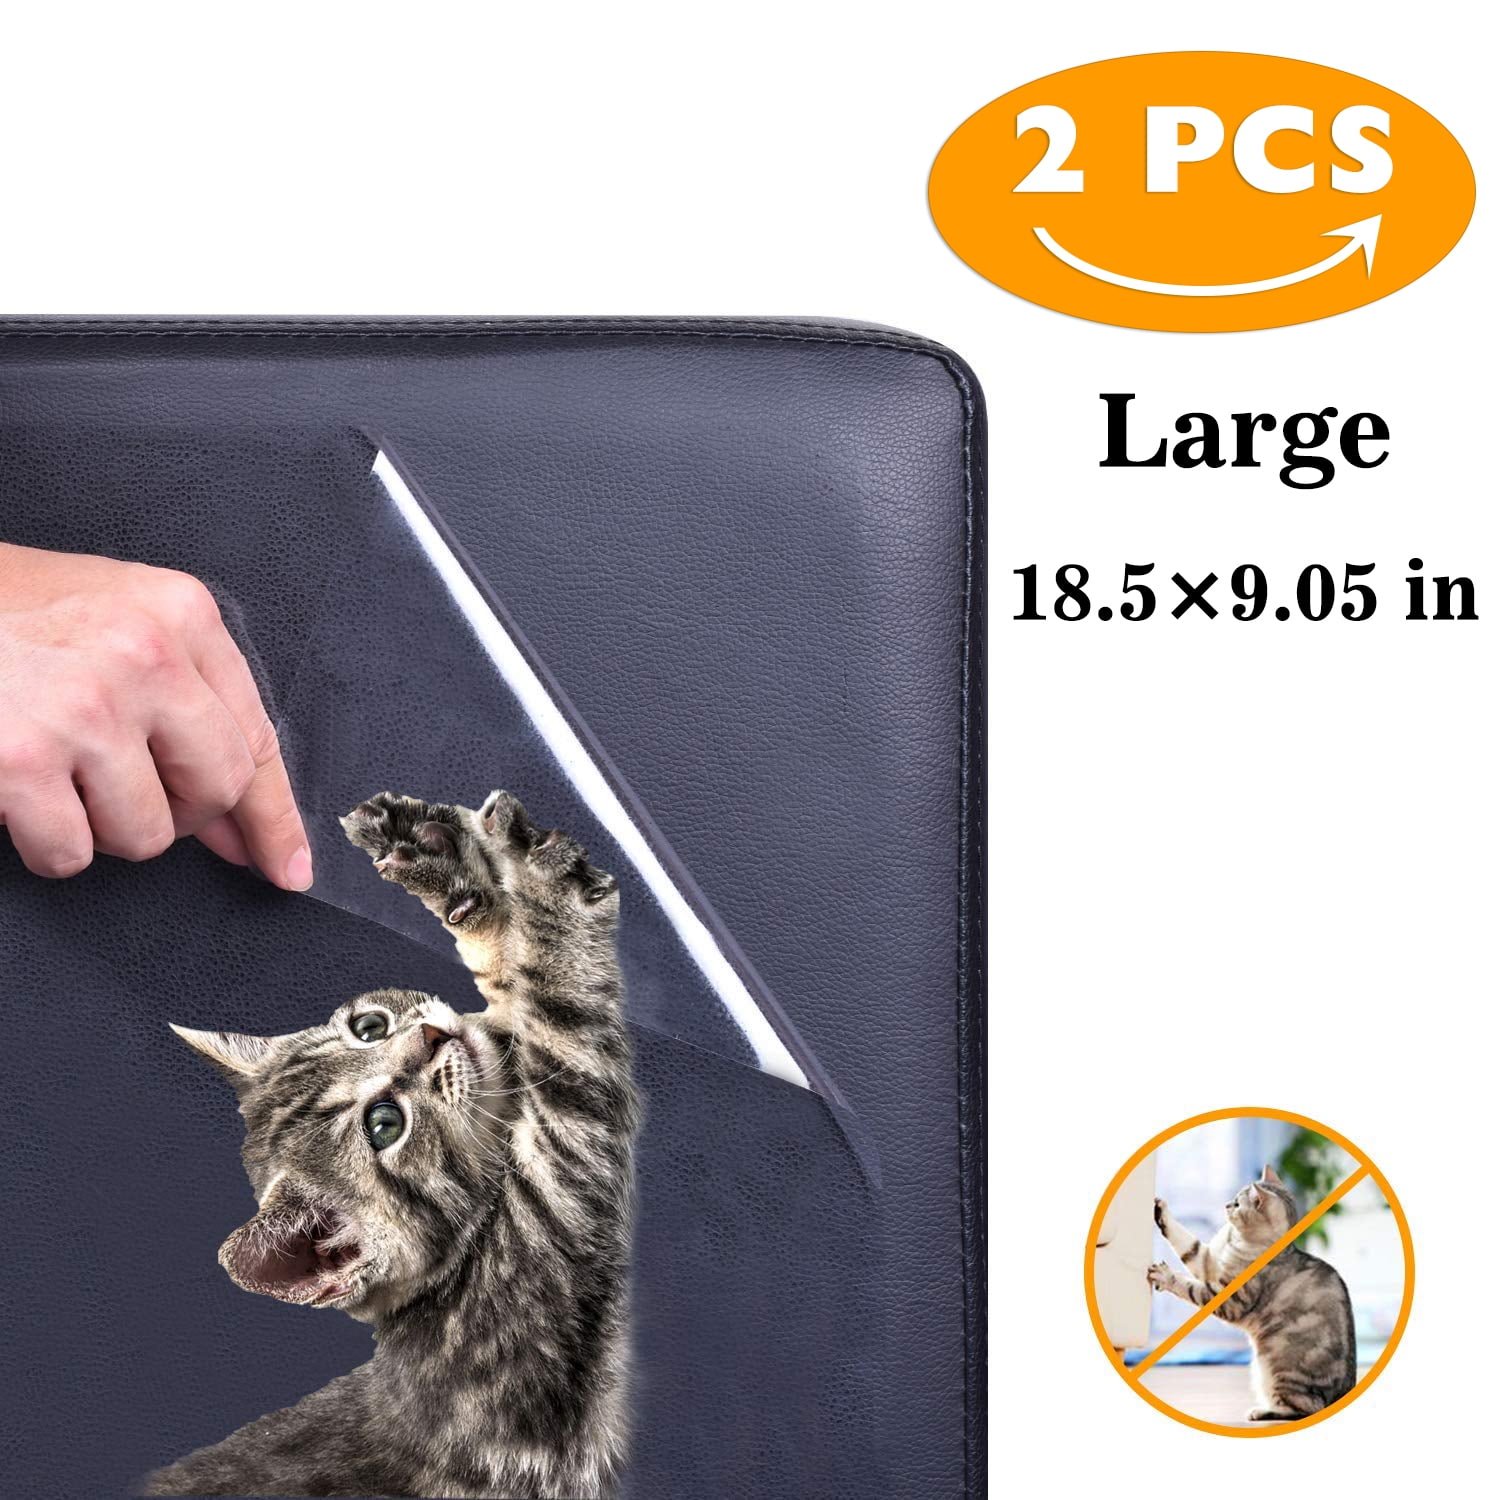 Door Mattress 12 Pack Clear Flexible Self-Adhesive Cat Dog Claw Guards with Pins Walls Cat Scratch Furniture Protector Pad Deterrent for Couch KEBE Pet Scratch Protector